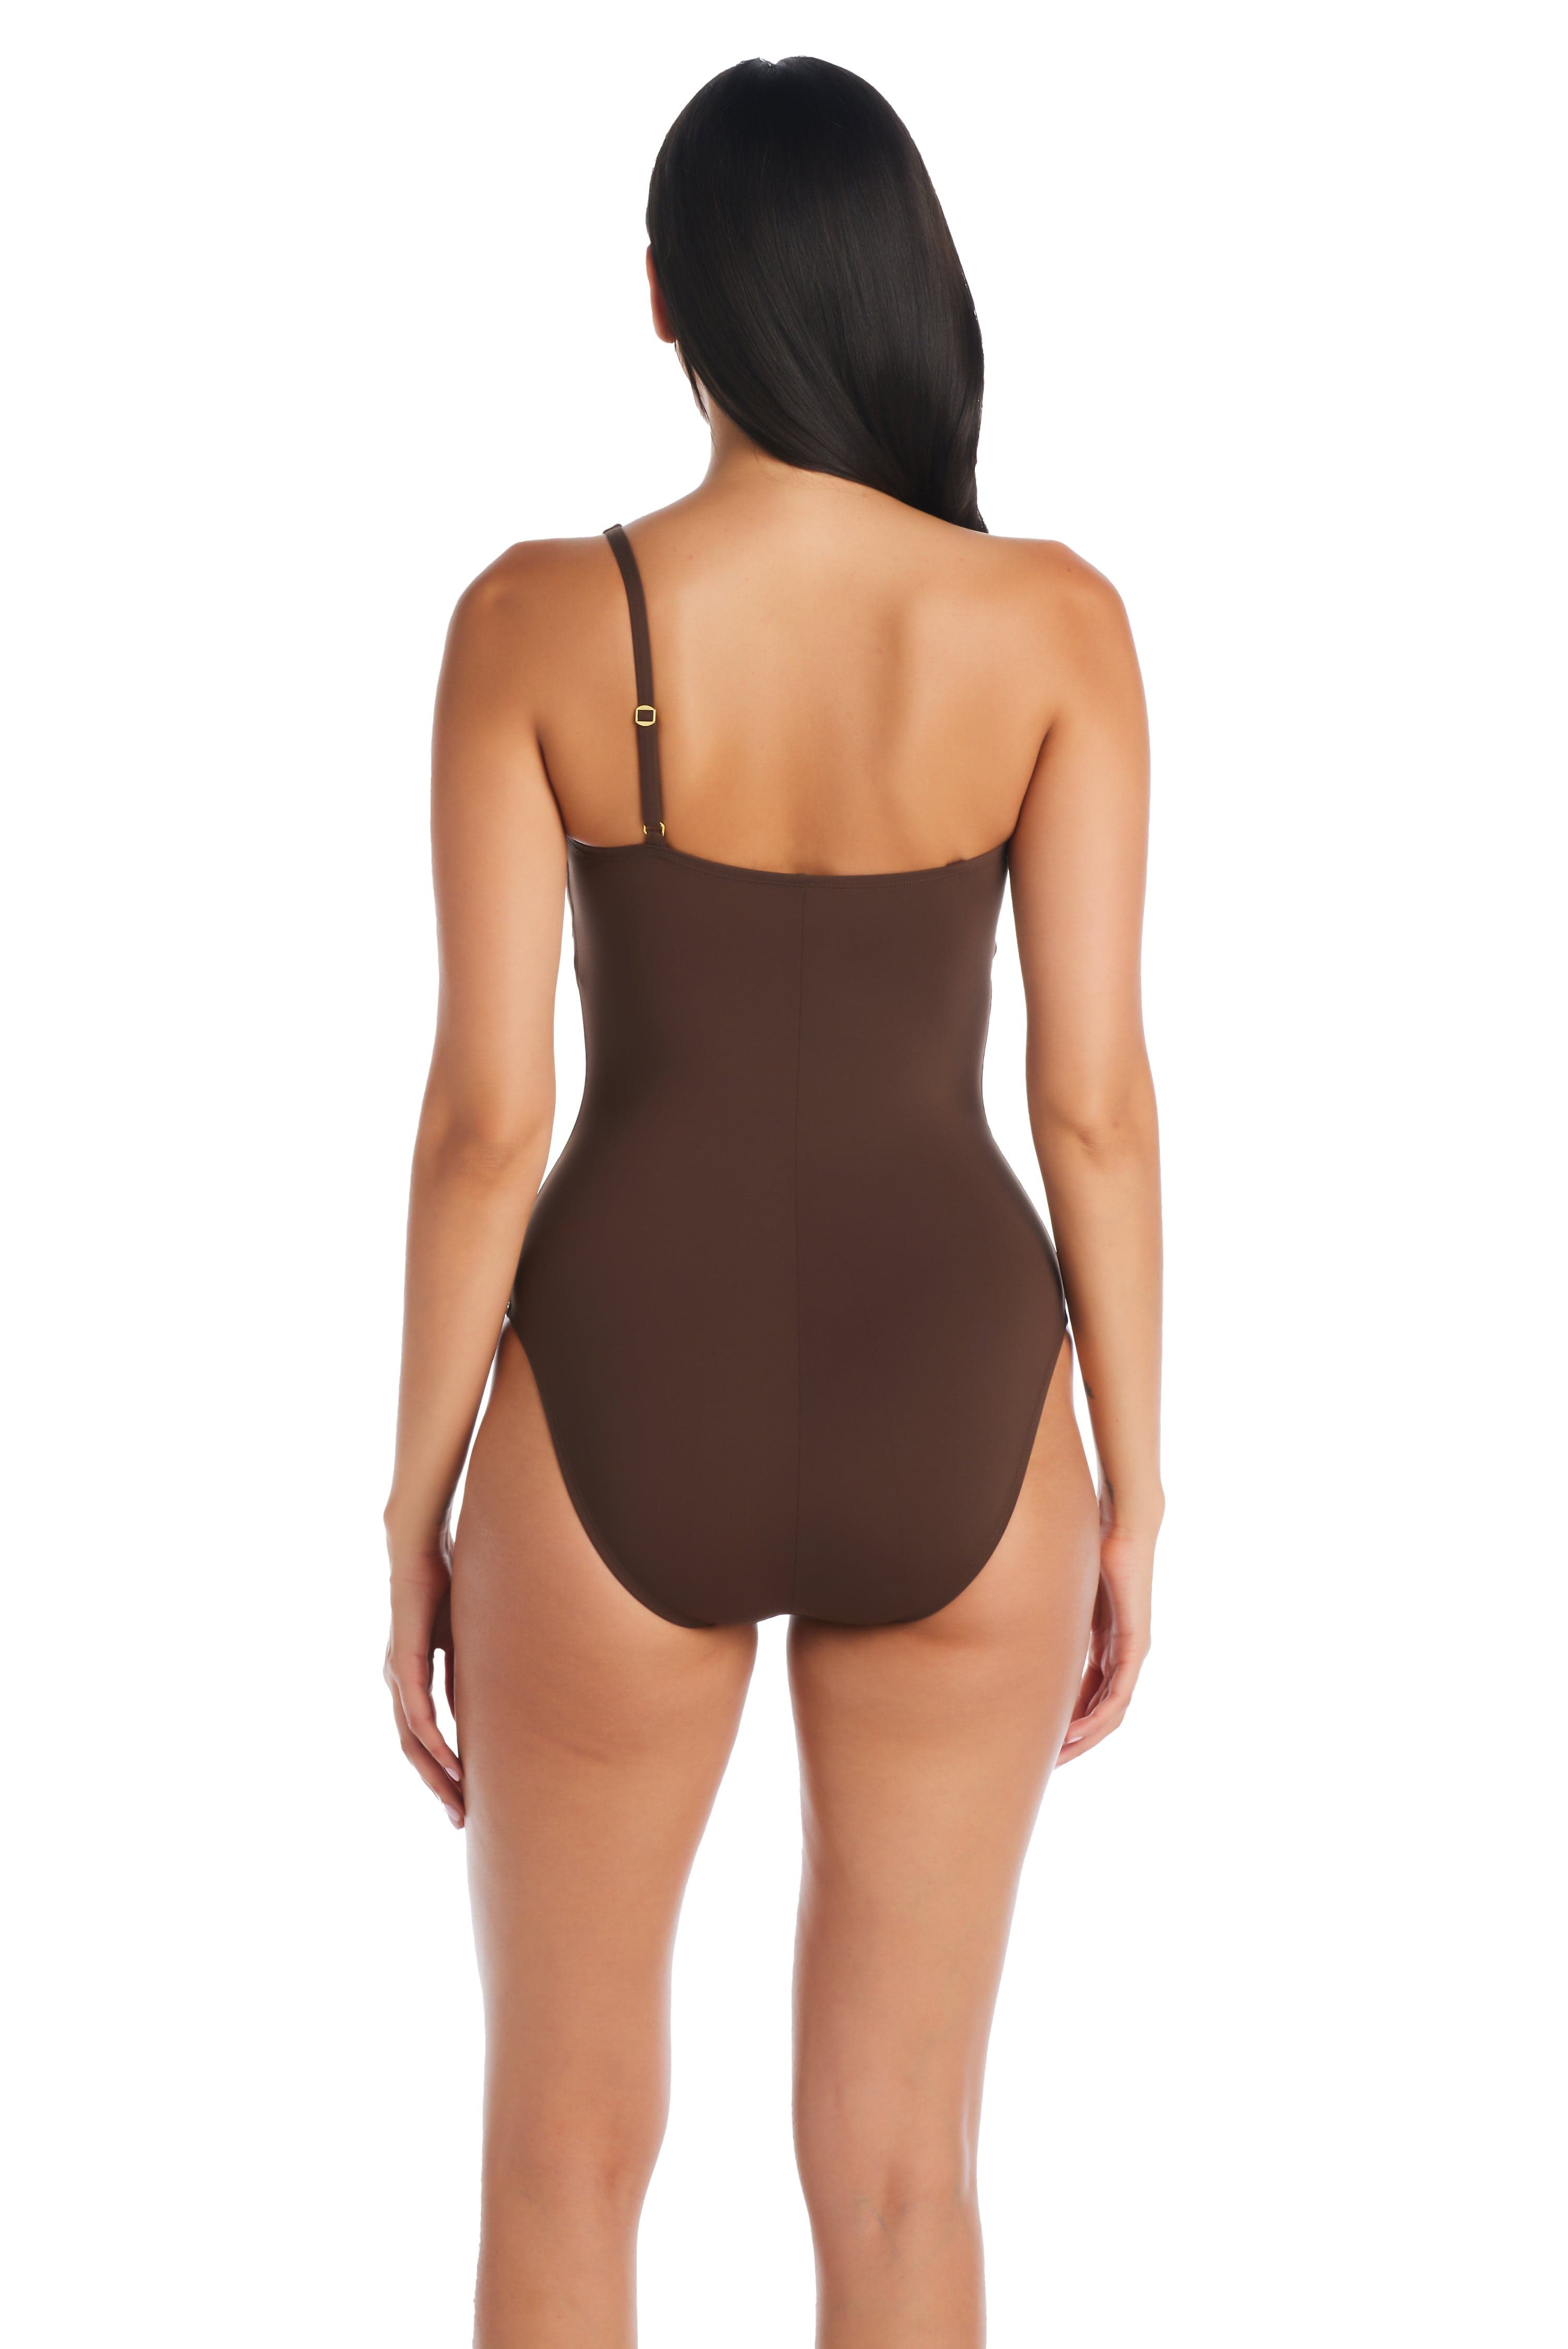 Don't Mesh With Me One Piece Mesh One Shoulder Swimsuit | Bleu Rod